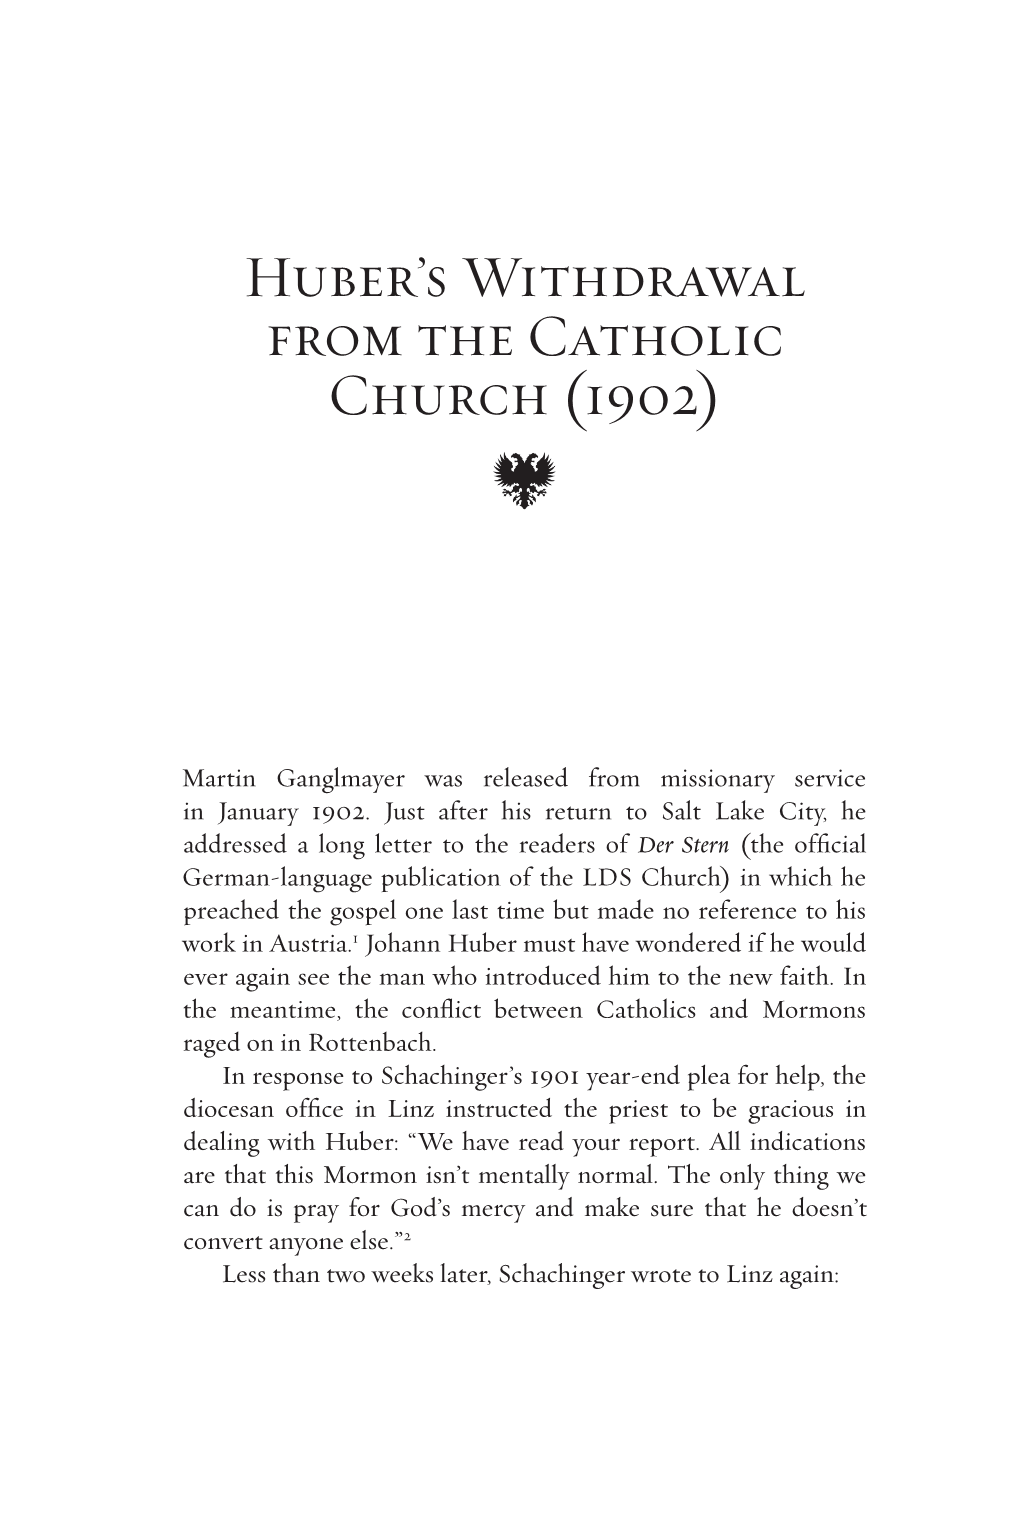 Huber's Withdrawal from the Catholic Church